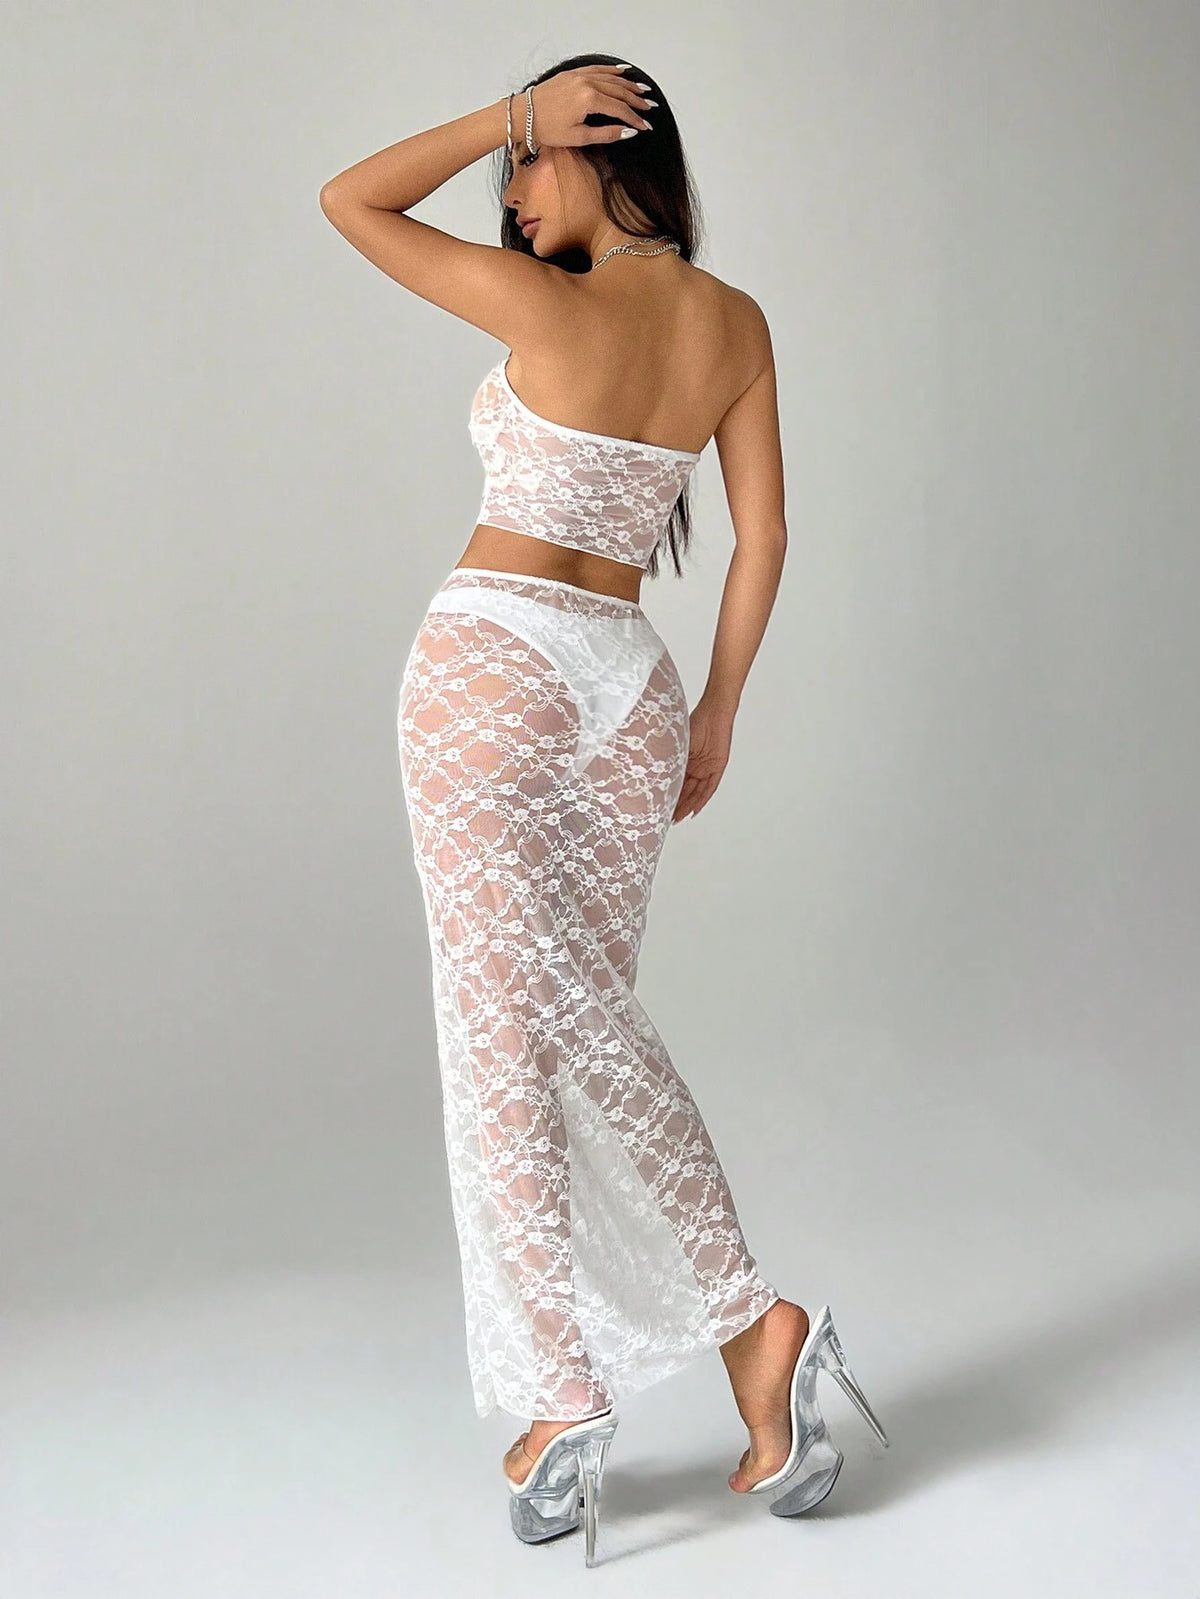 Solid Color Sexy Crop Tube Top And Long Pants Set For Women